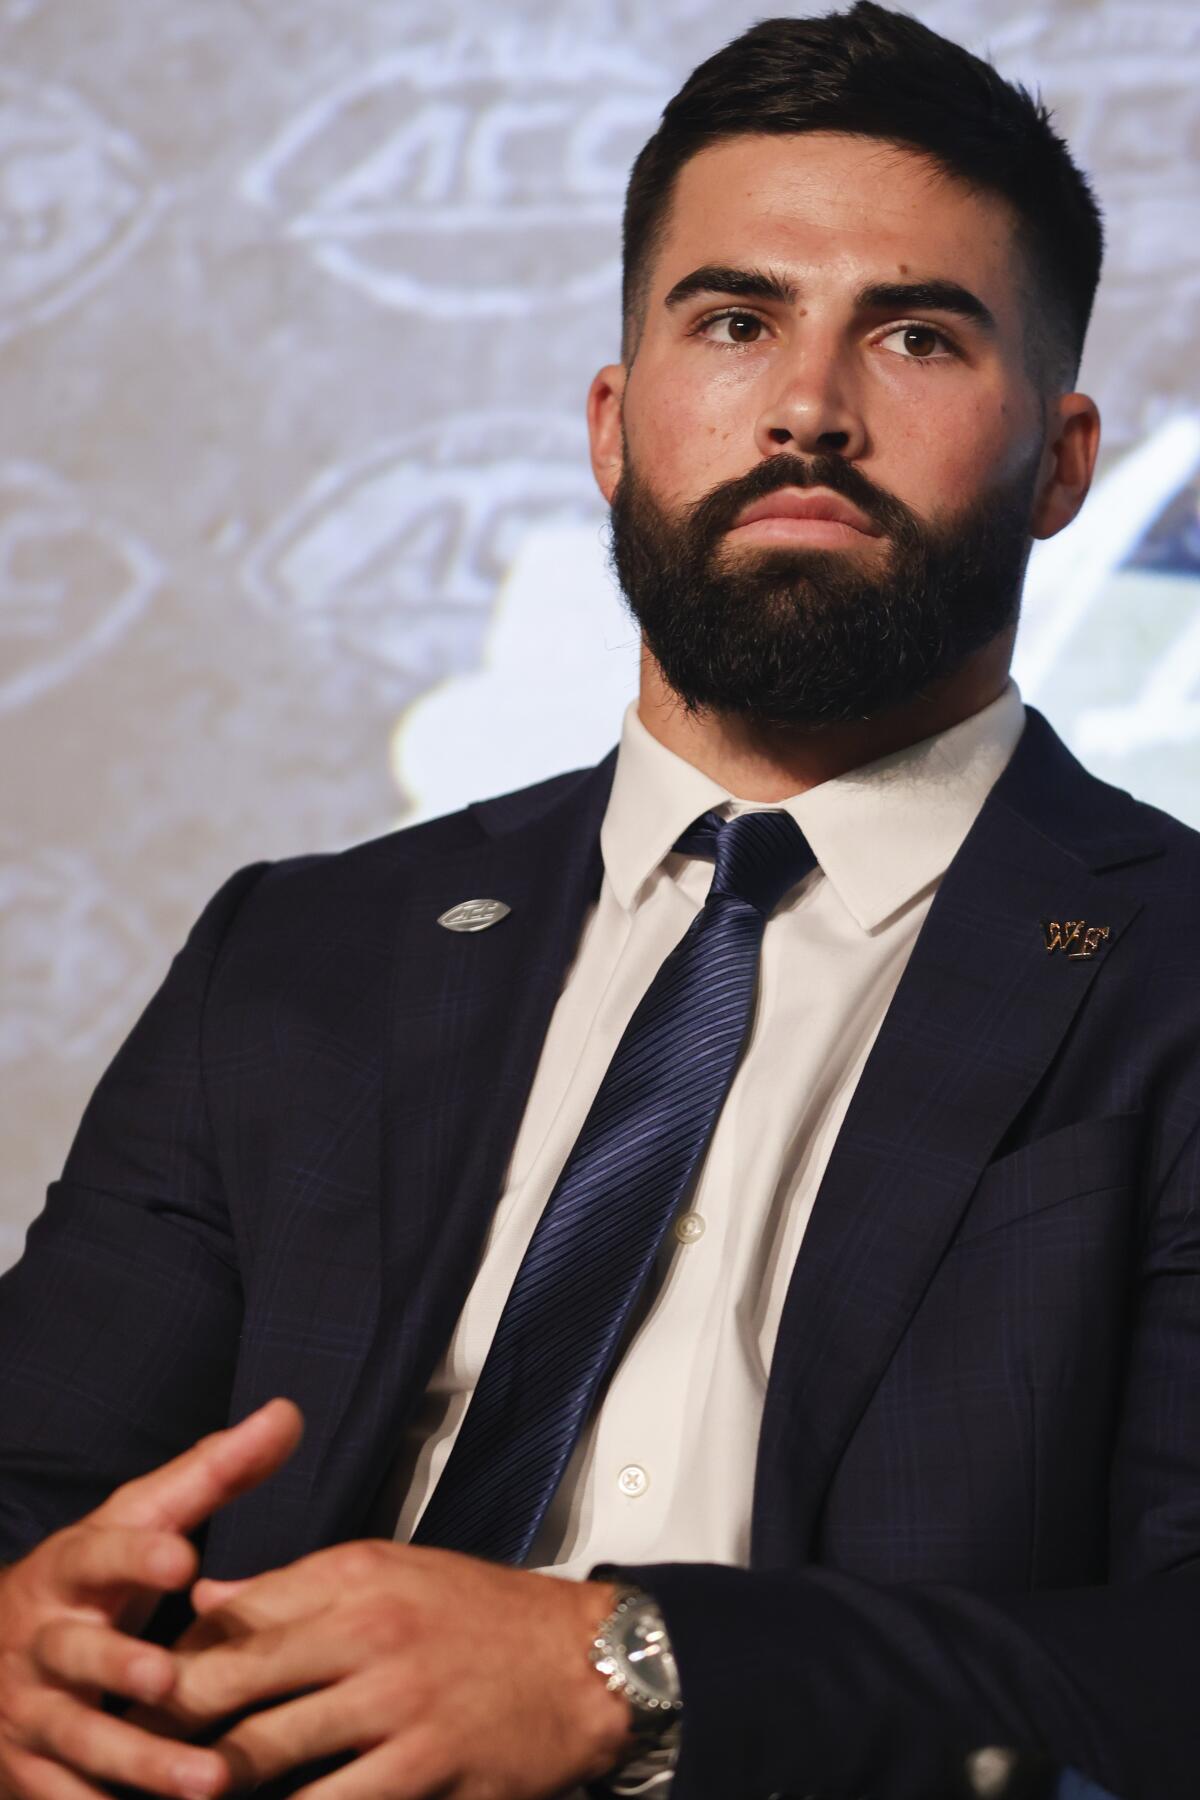 Wake Forest quarterback Sam Hartman sits on the stage at the NCAA college football Atlantic Coast Conference Media Days in Charlotte, N.C., Wednesday, July 20, 2022. (AP Photo/Nell Redmond)